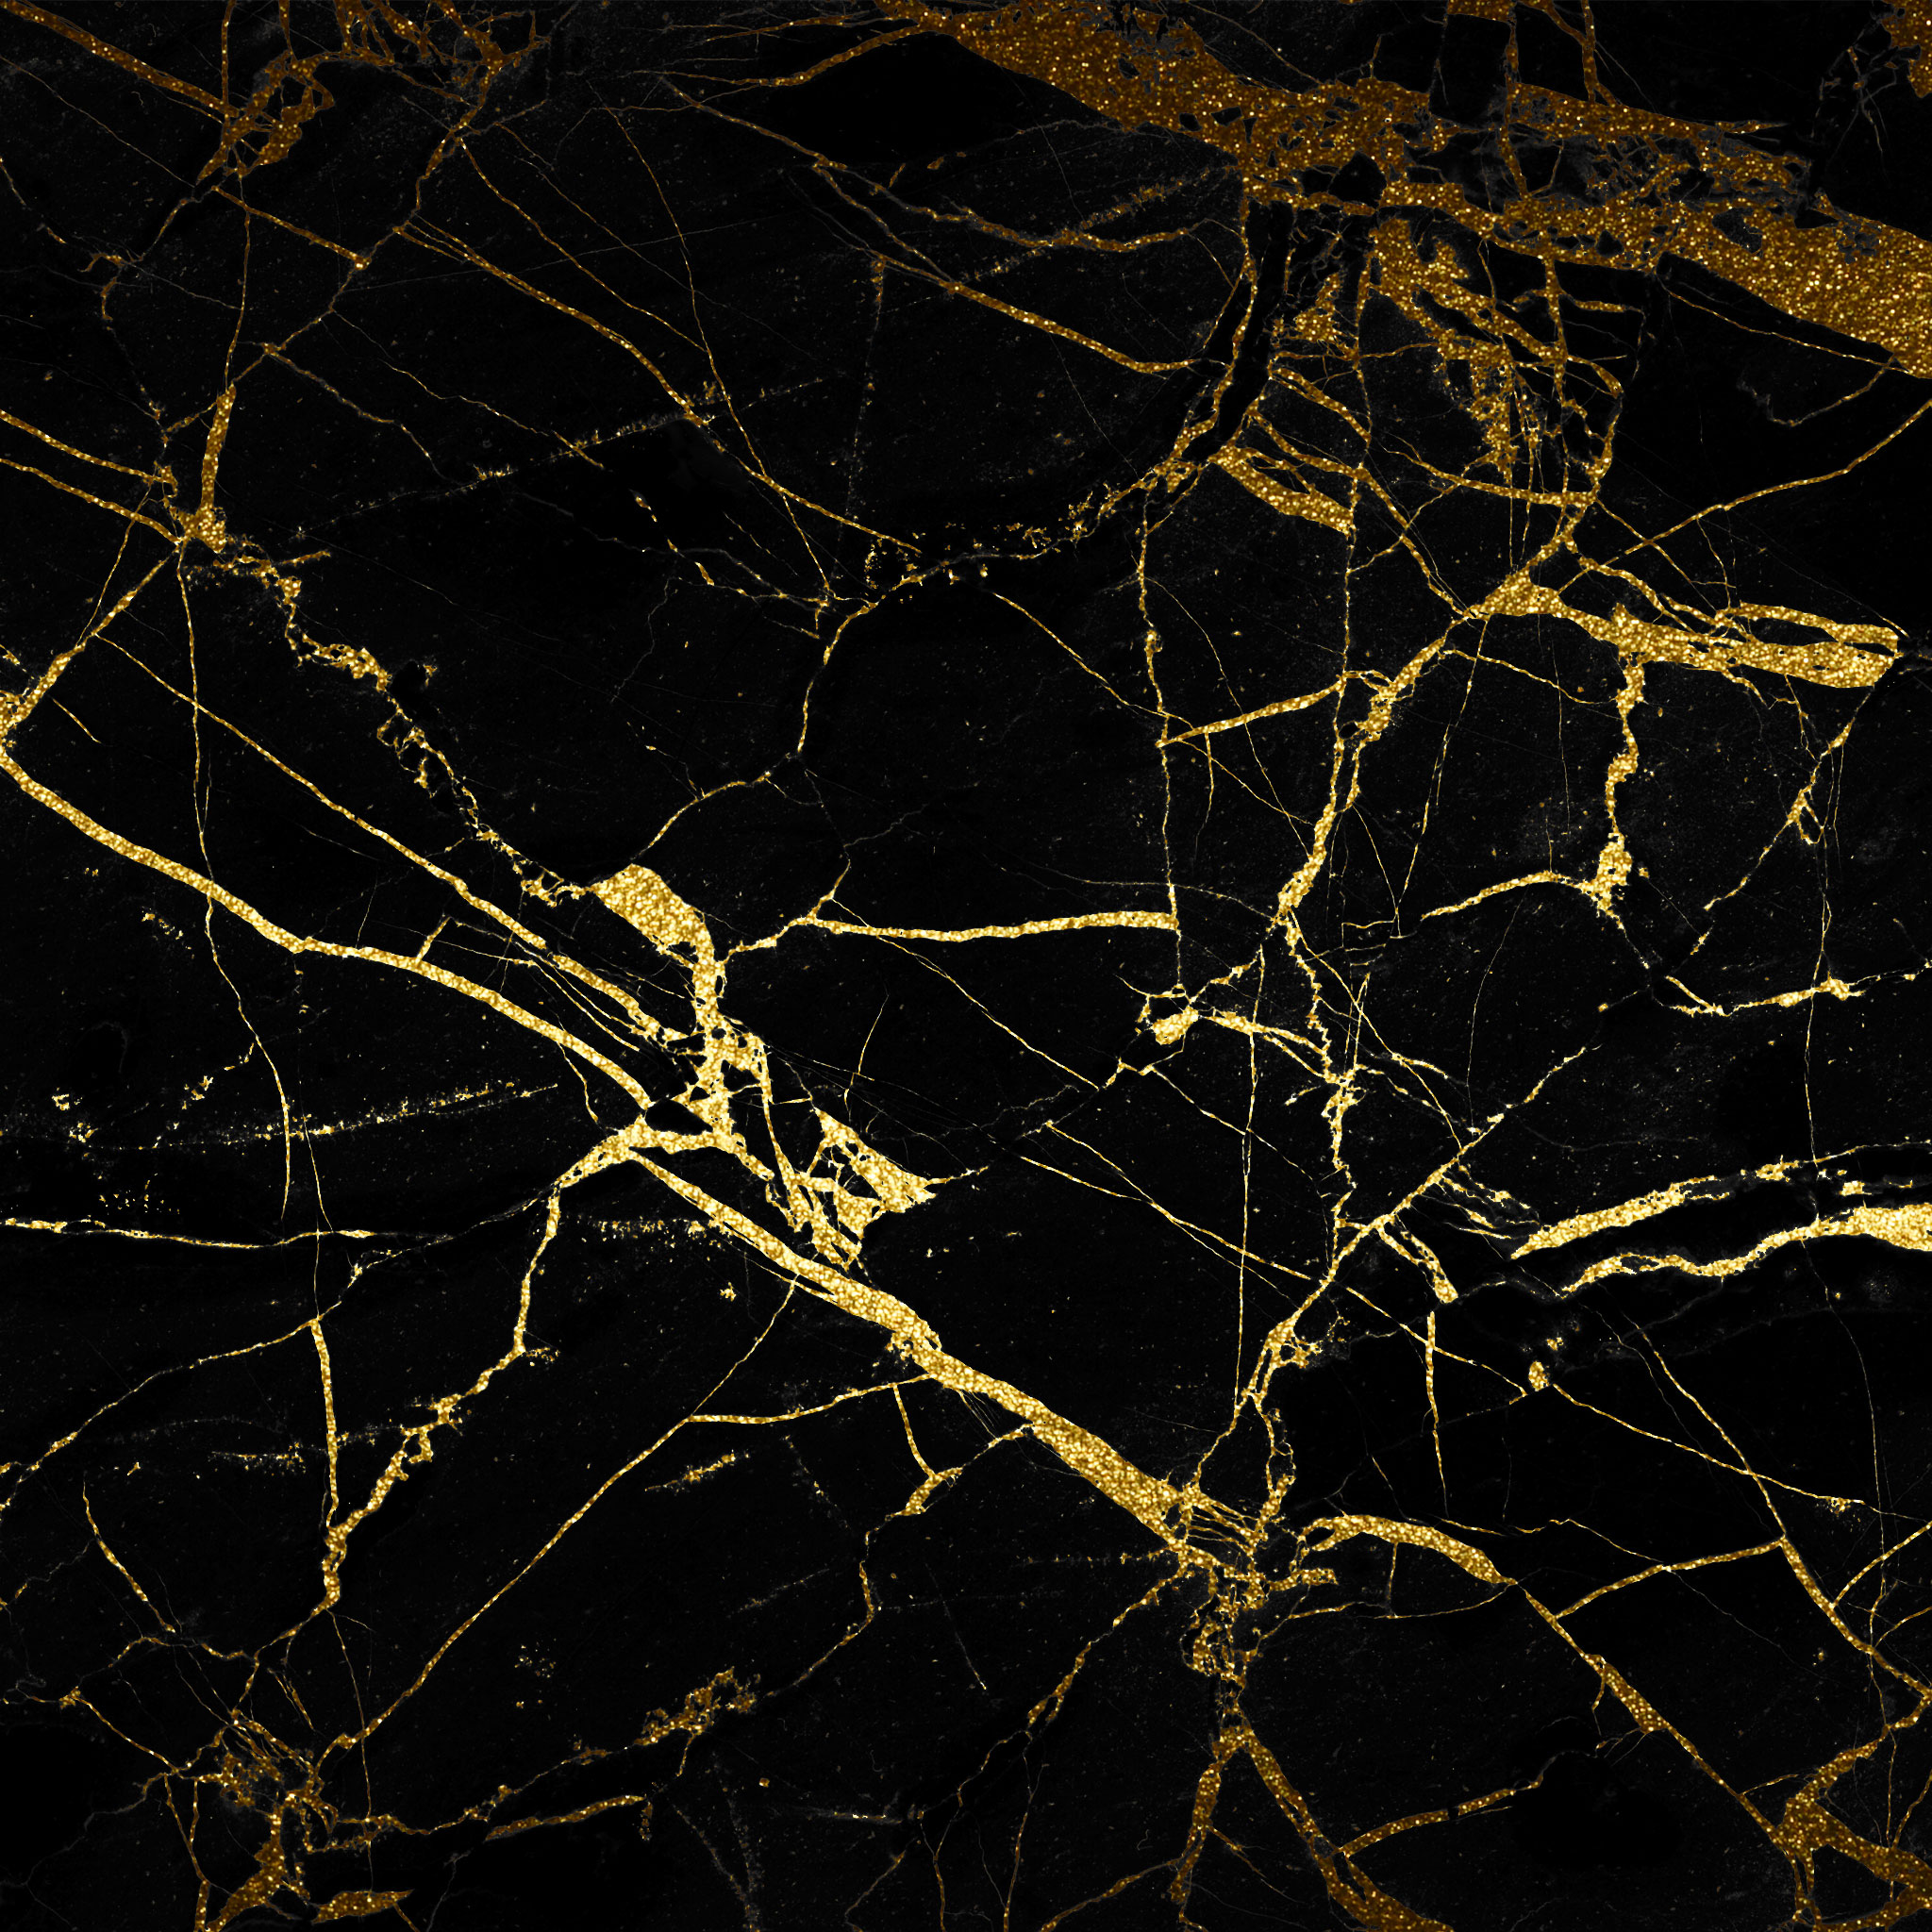 [99+] Black And Gold Marble Wallpapers on WallpaperSafari